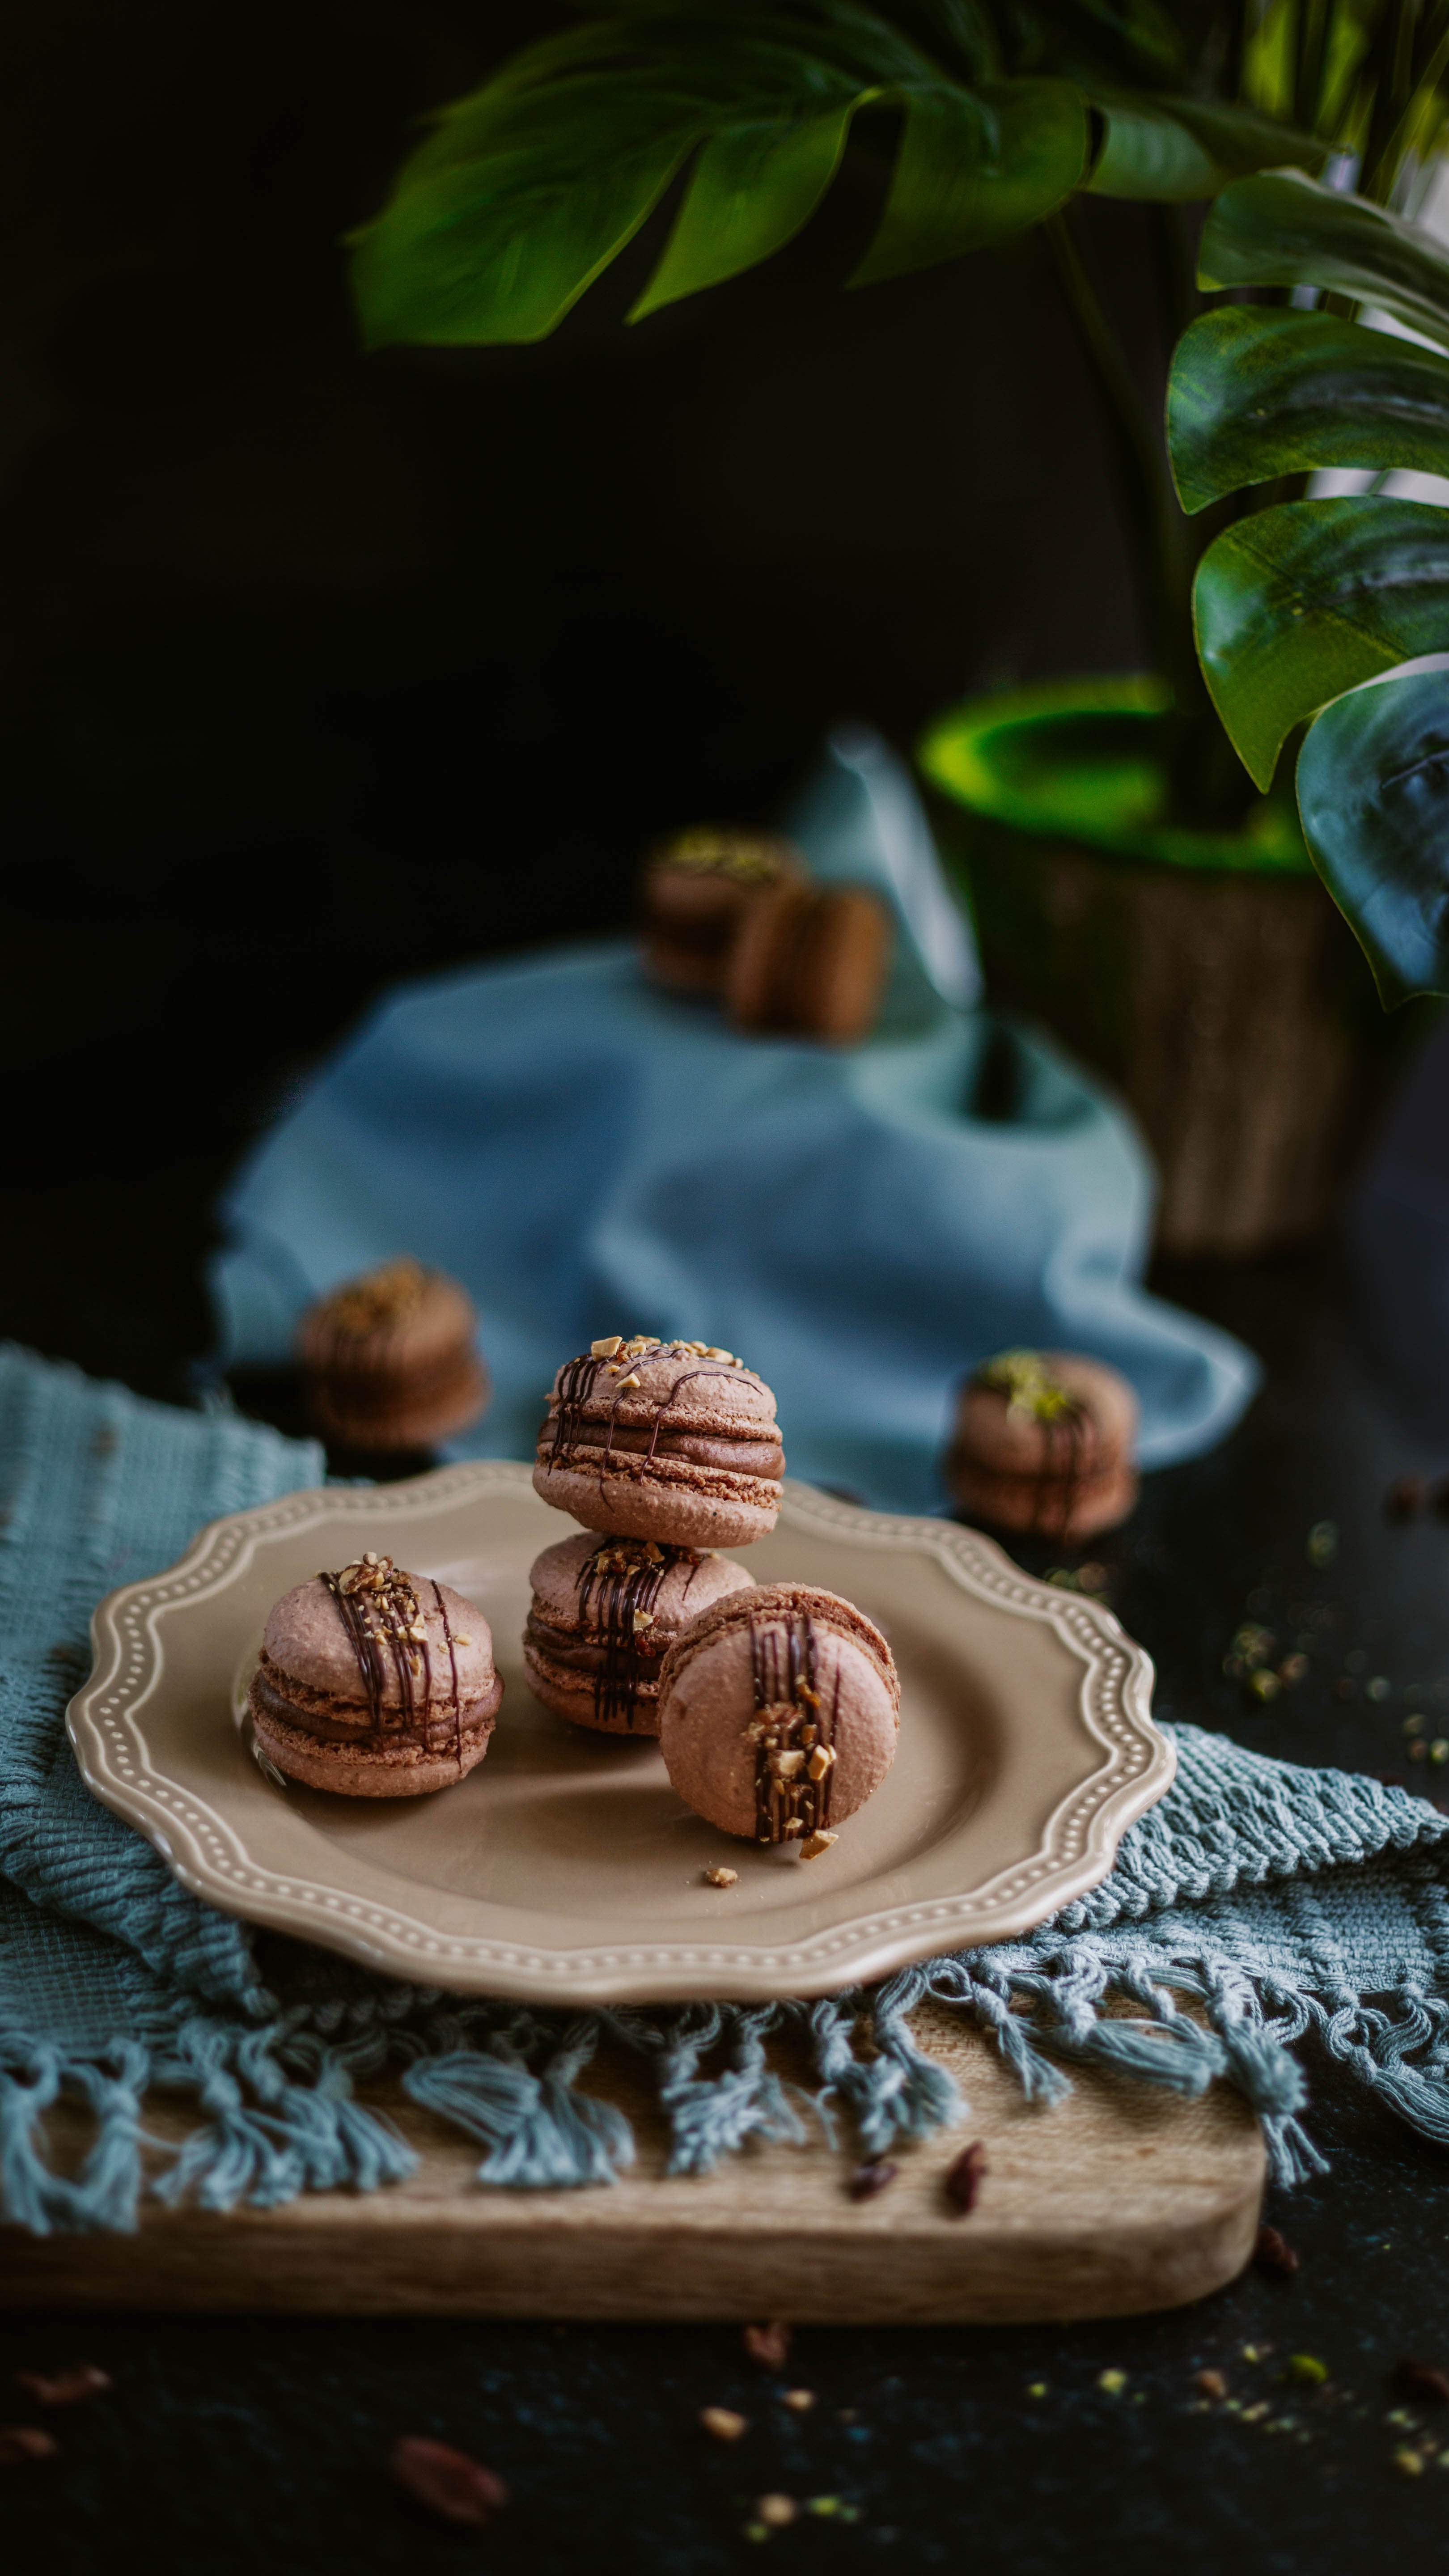 Wallpaper for mobile devices macaroons, desert, chocolate, bakery products